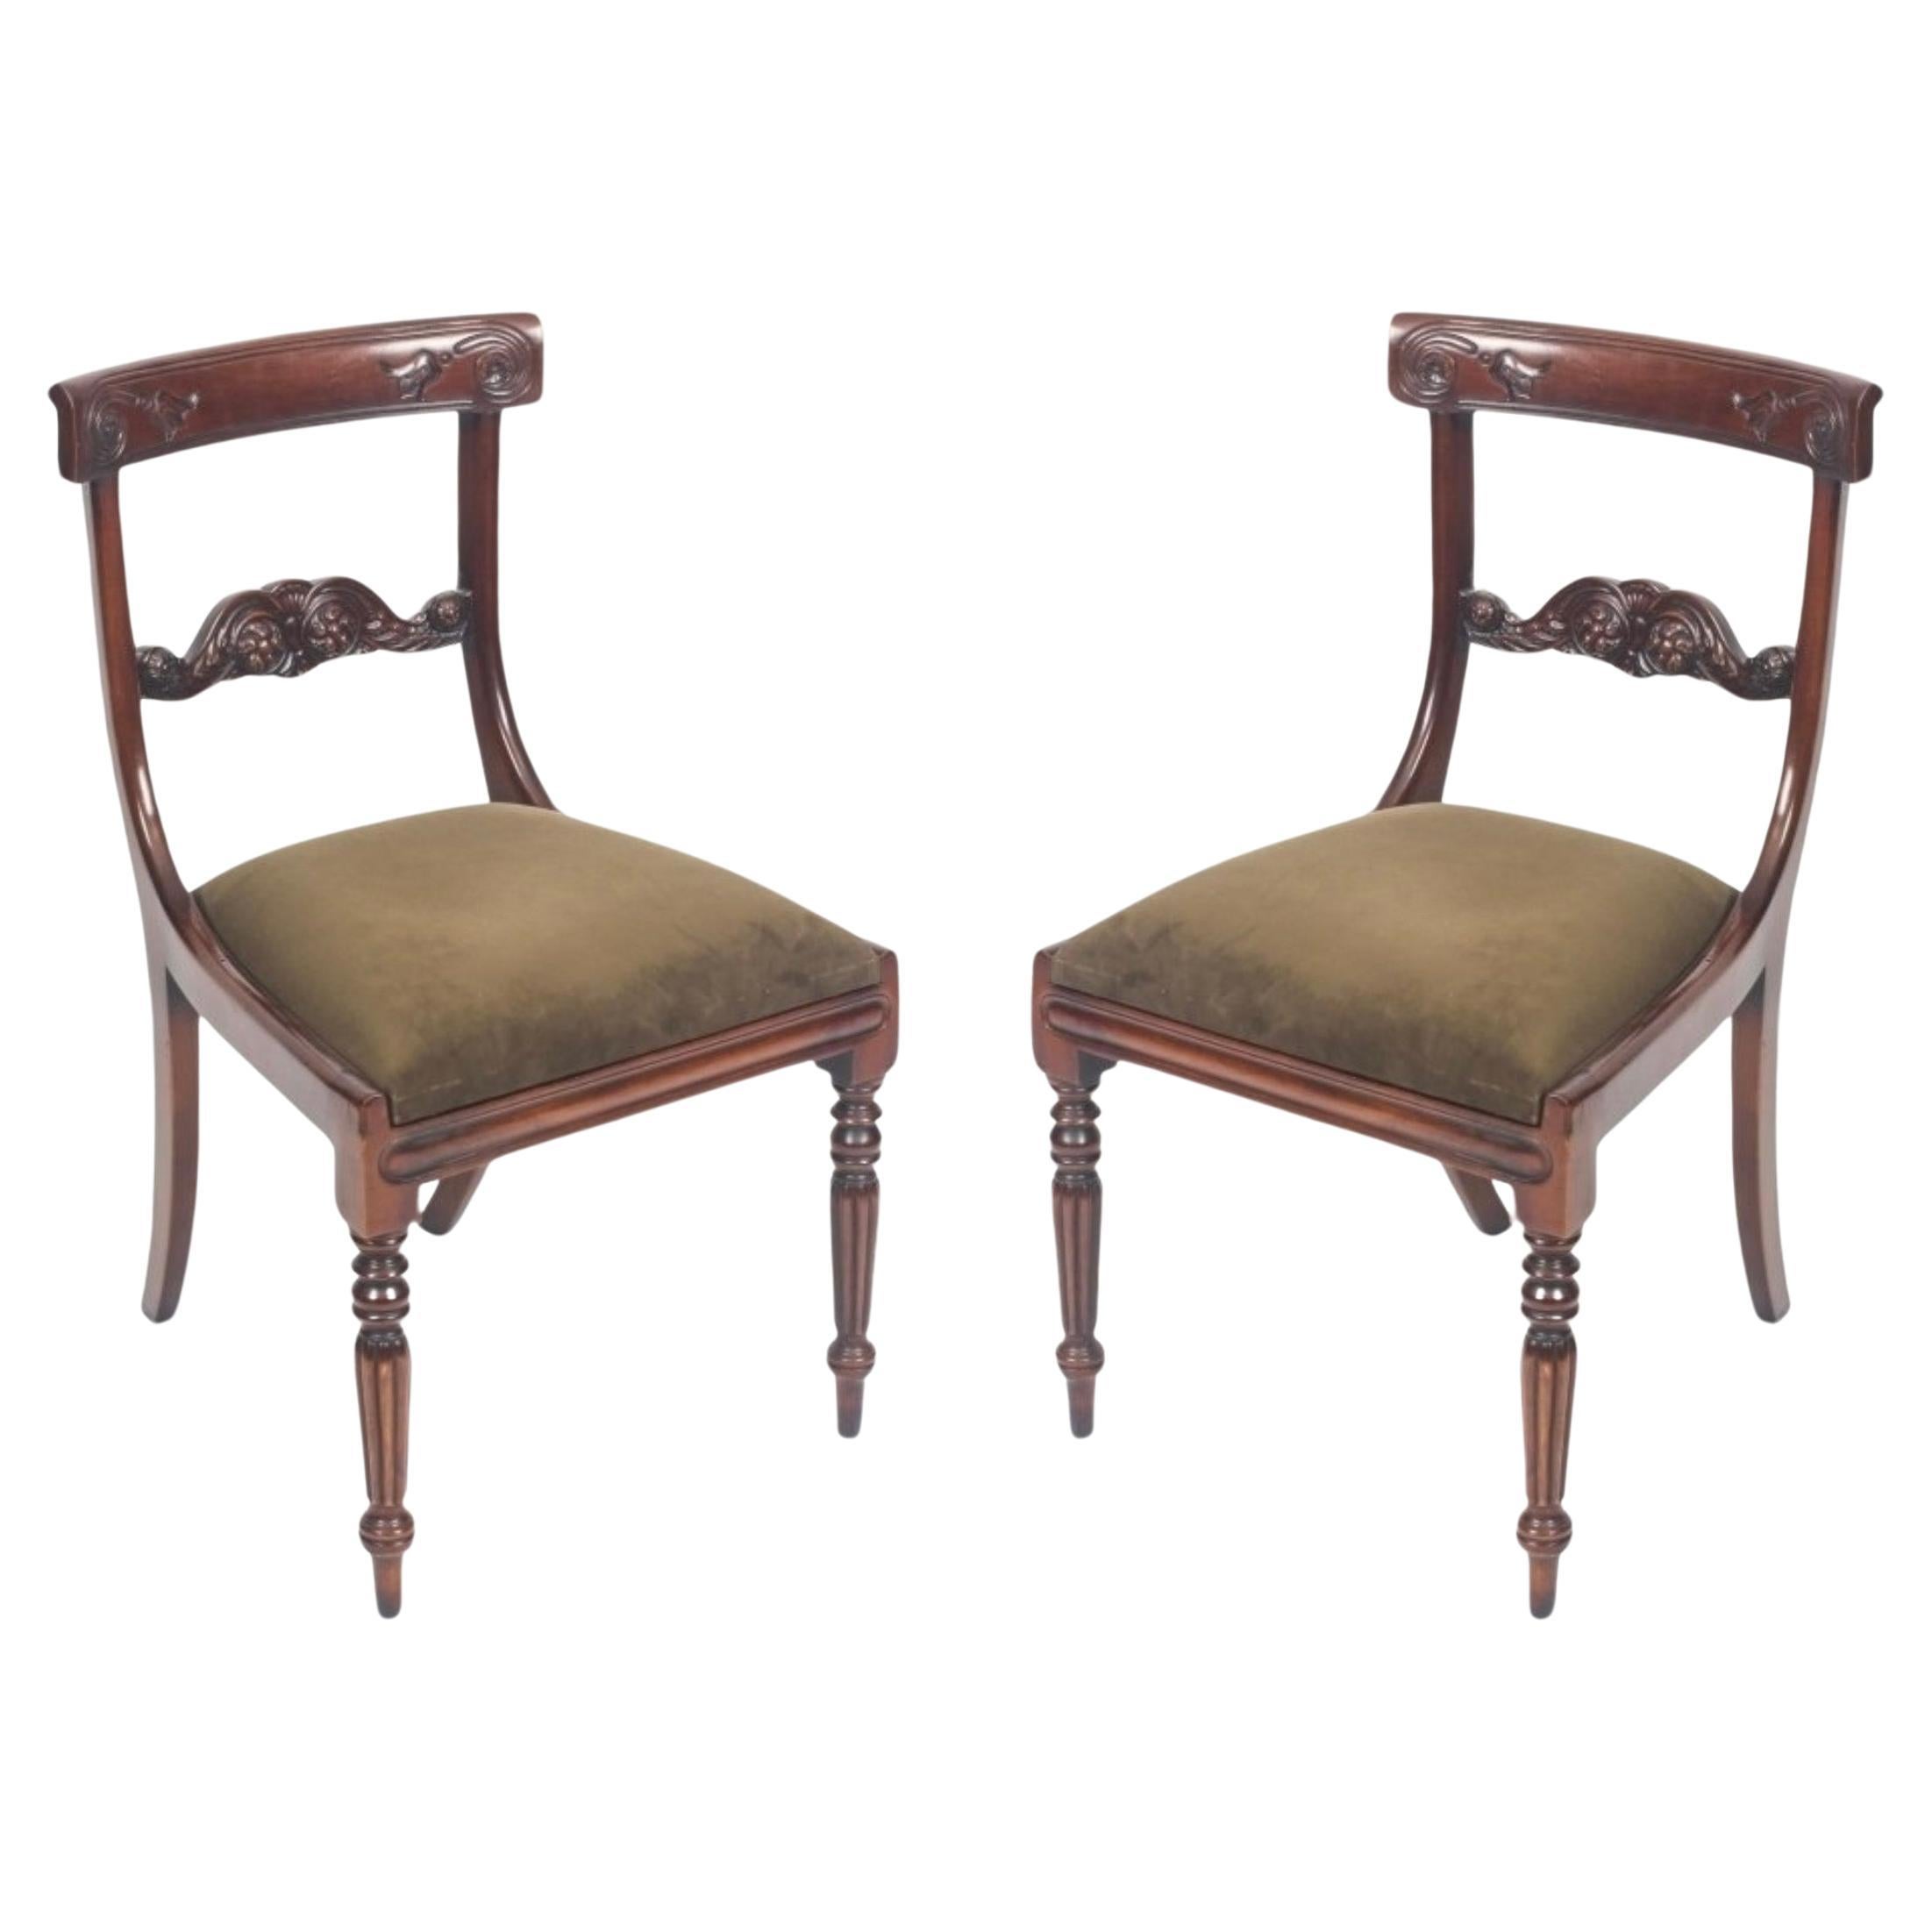 Vintage Pair Regency Revival Mahogany Bar Back Dining Chairs 20th Century For Sale